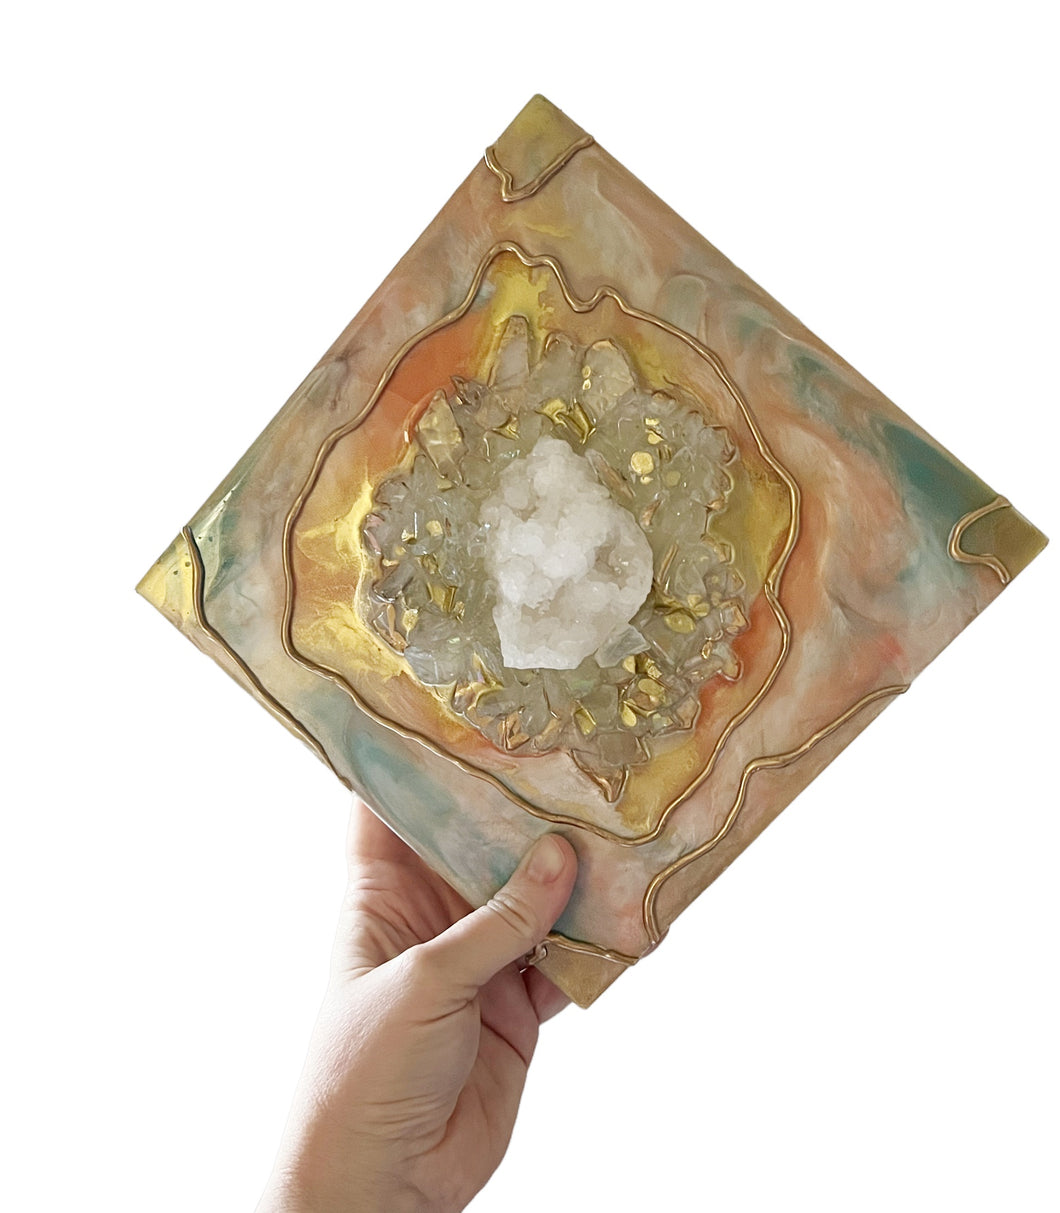 MINDFUL INTENTIONS /Quartz / Geode Inspired Wall Art / One of a Kind / Resin Art